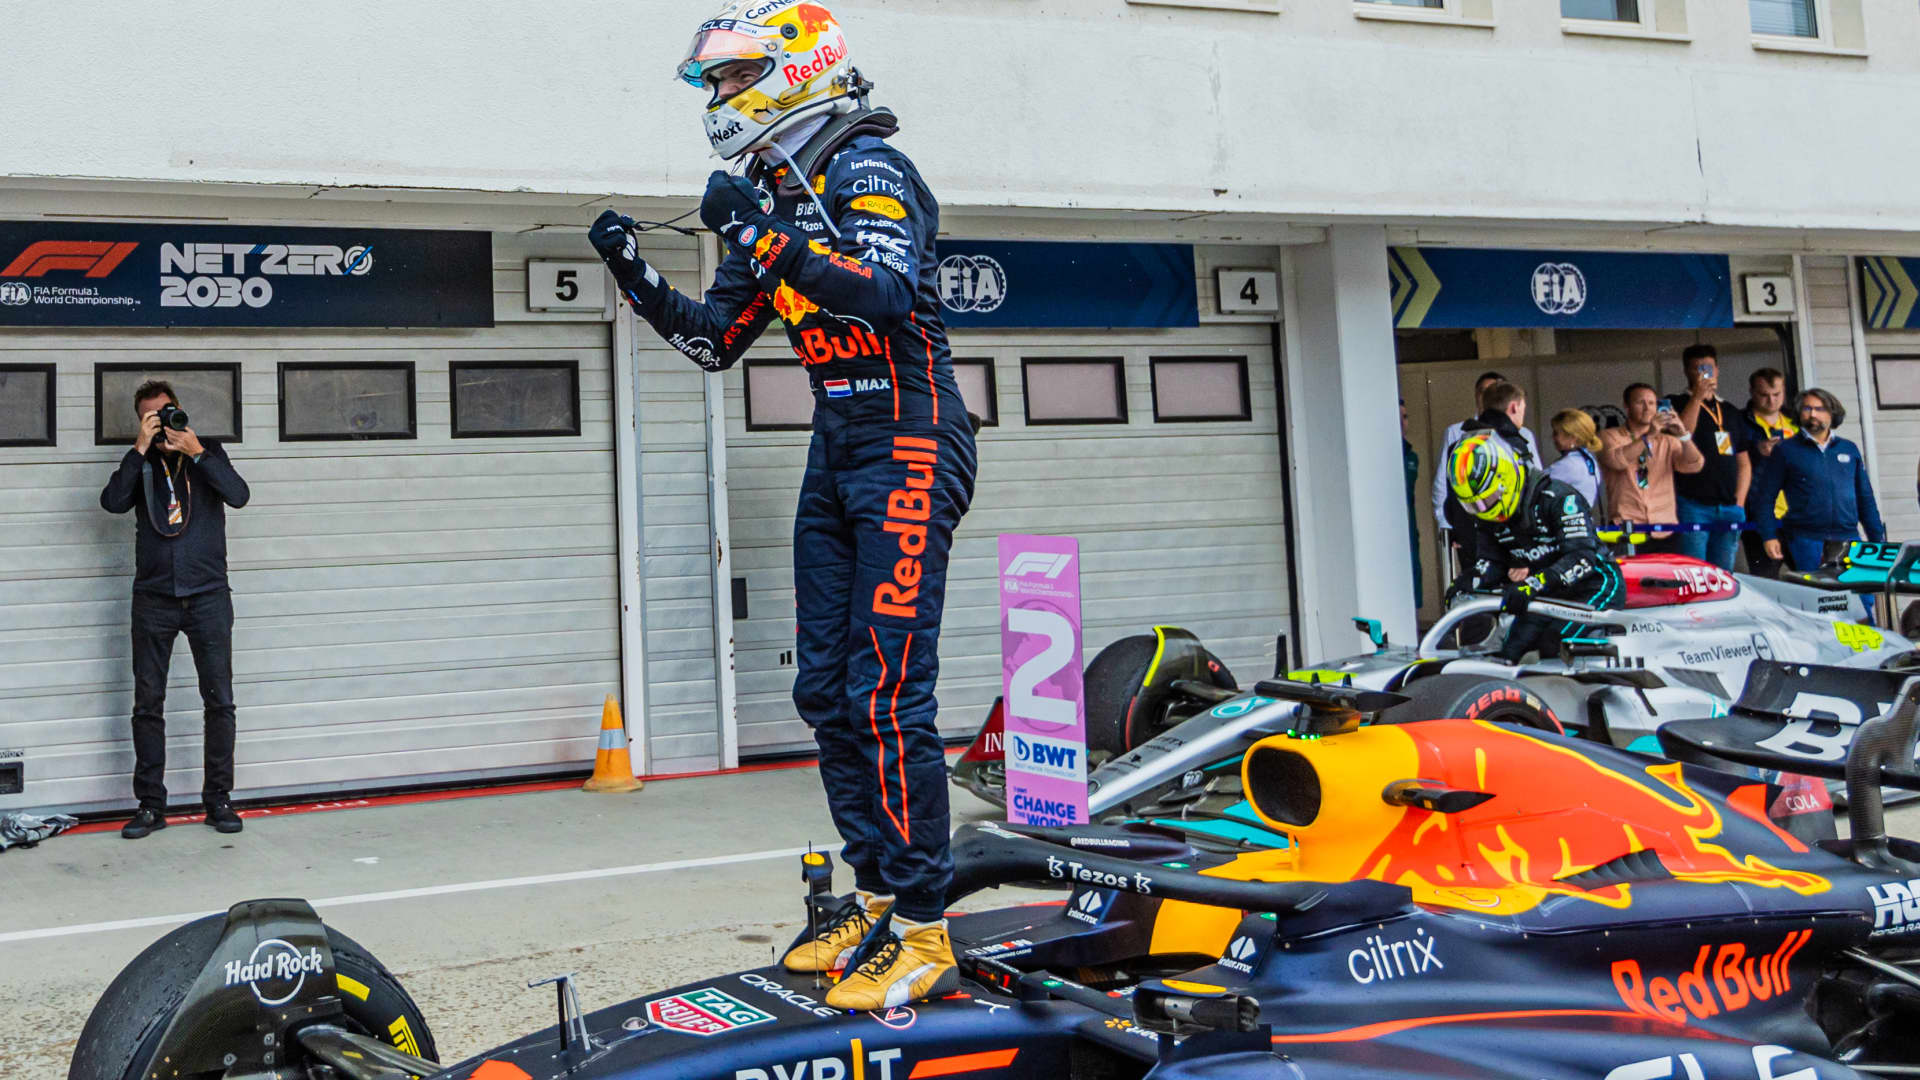 Max Verstappen won the race at Hungarian Aramco Formula One Grand Prix on July 31, 2022, in Mogyorod, Hungary. Though he had to start in the 10th position after a power unit hiccup during the qualifying session, he managed to pull off a victory.